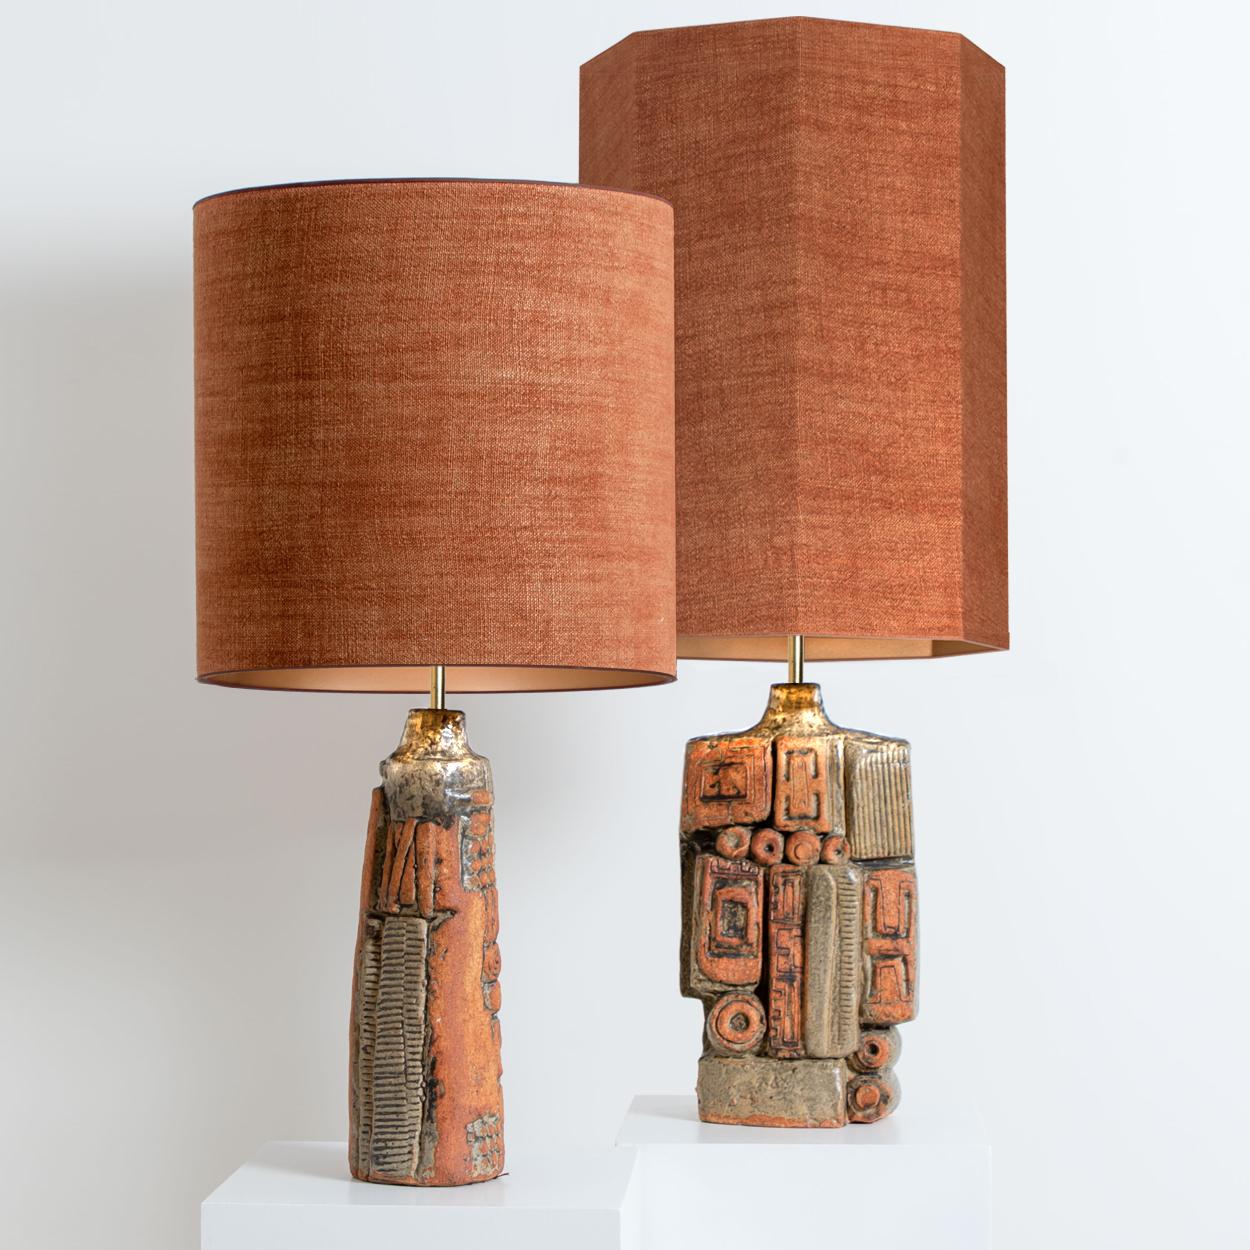 A rare pair of table lamps by Bernard Rooke, England, 1960s. Sculptural pieces, made of handmade ceramic elements in natural tones of terracotta and stone. With matching custom made lamp shade by René Houben. With warm bronze inner-shades.

The